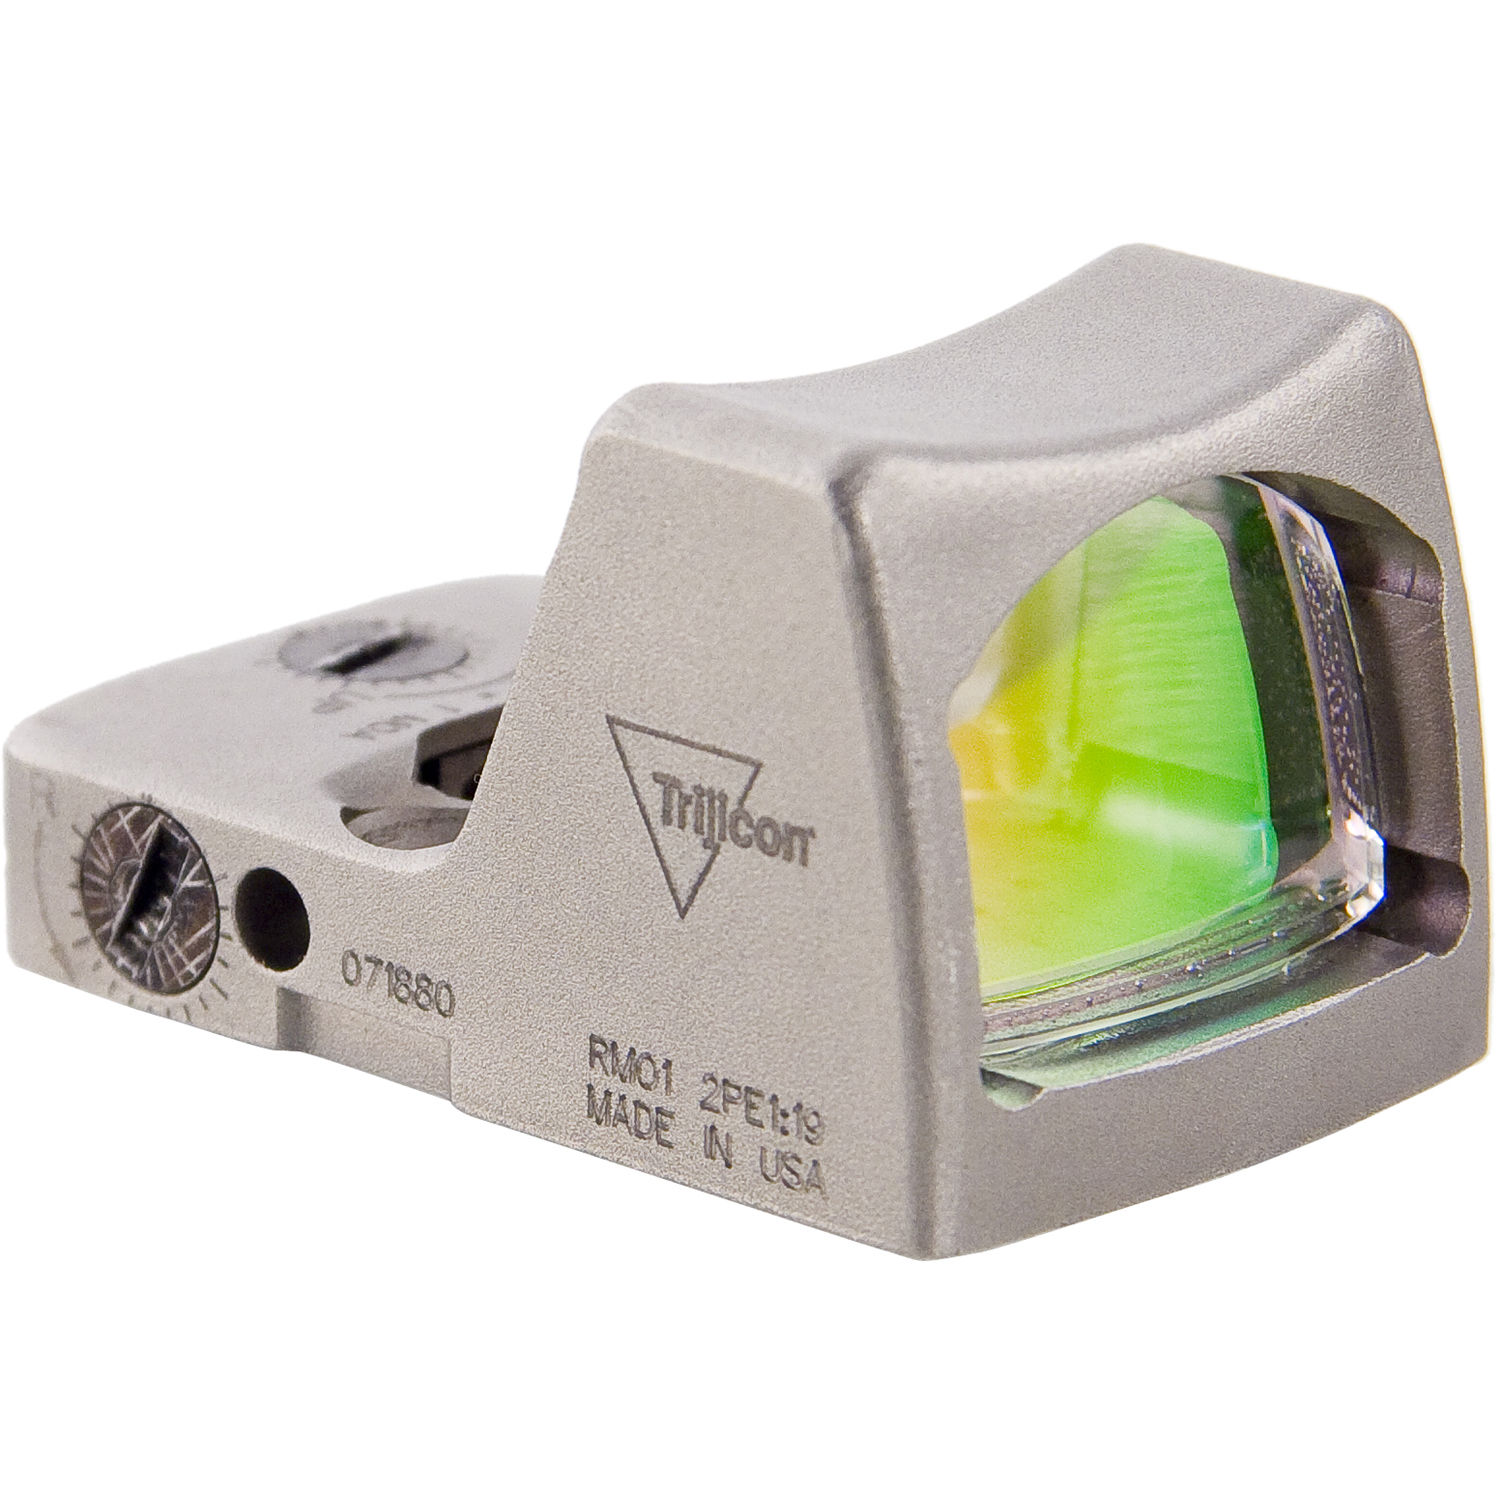 Trijicon Rmr Review Should You Buy This Mini Reflex Sight From Trijicon